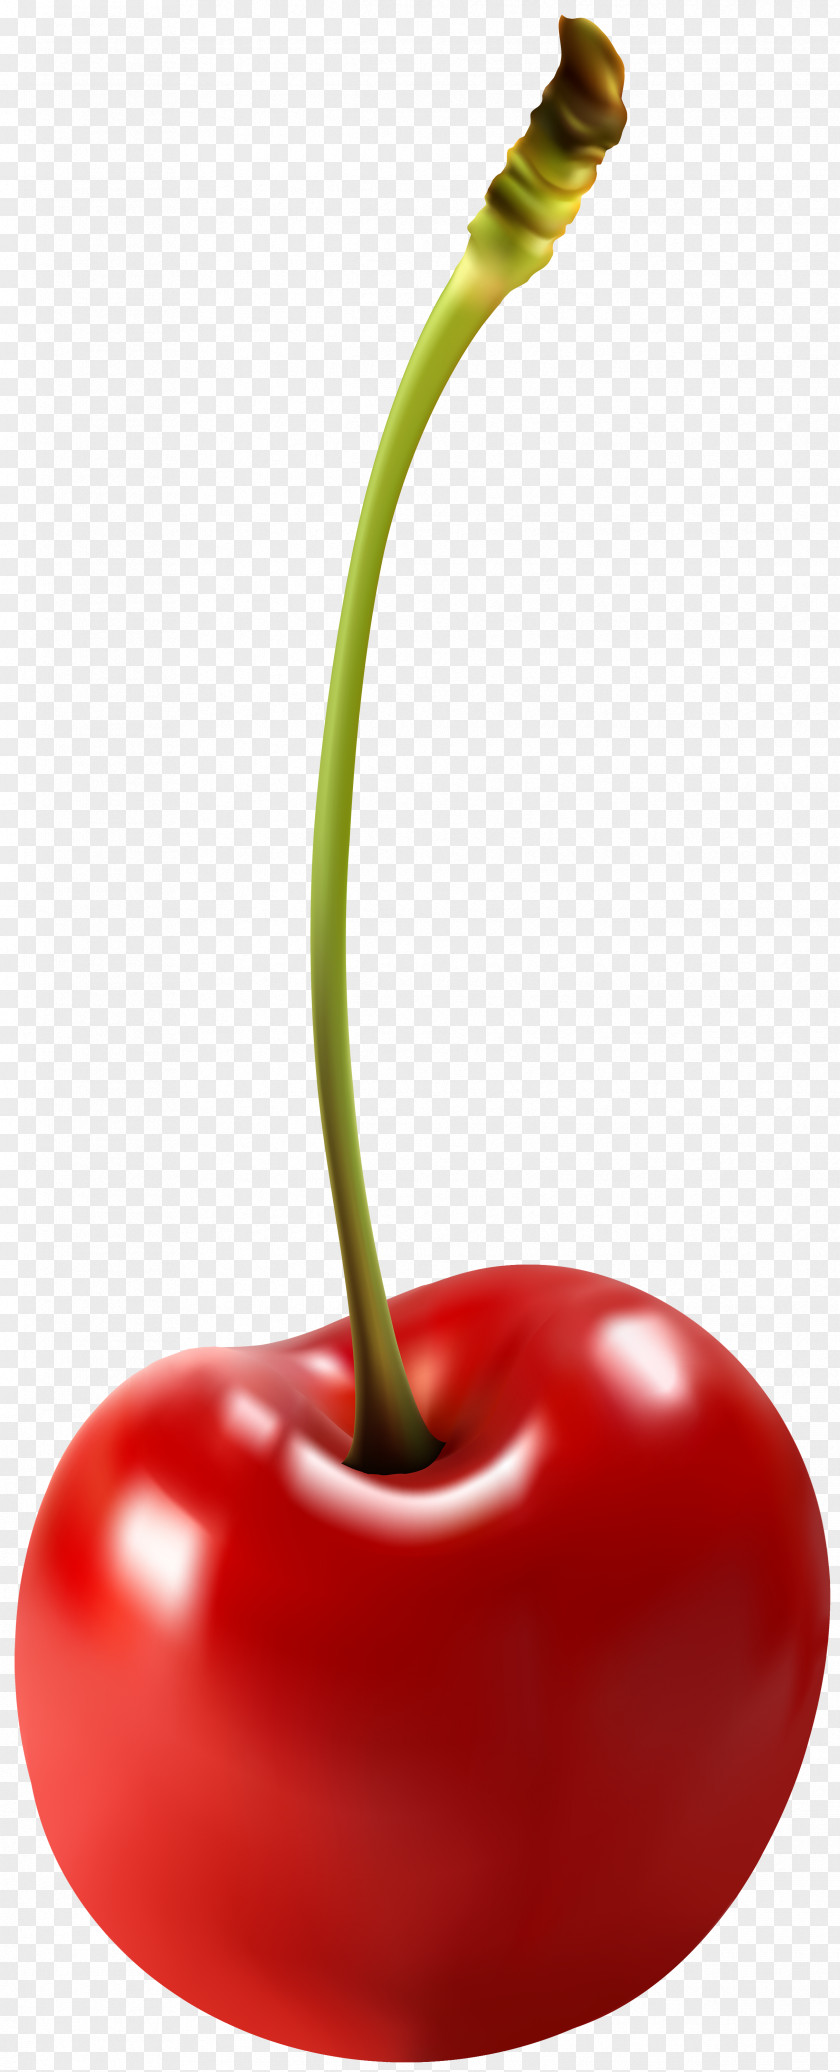 Cherry Free Clip Art Image Cordial Fruit Computer File PNG